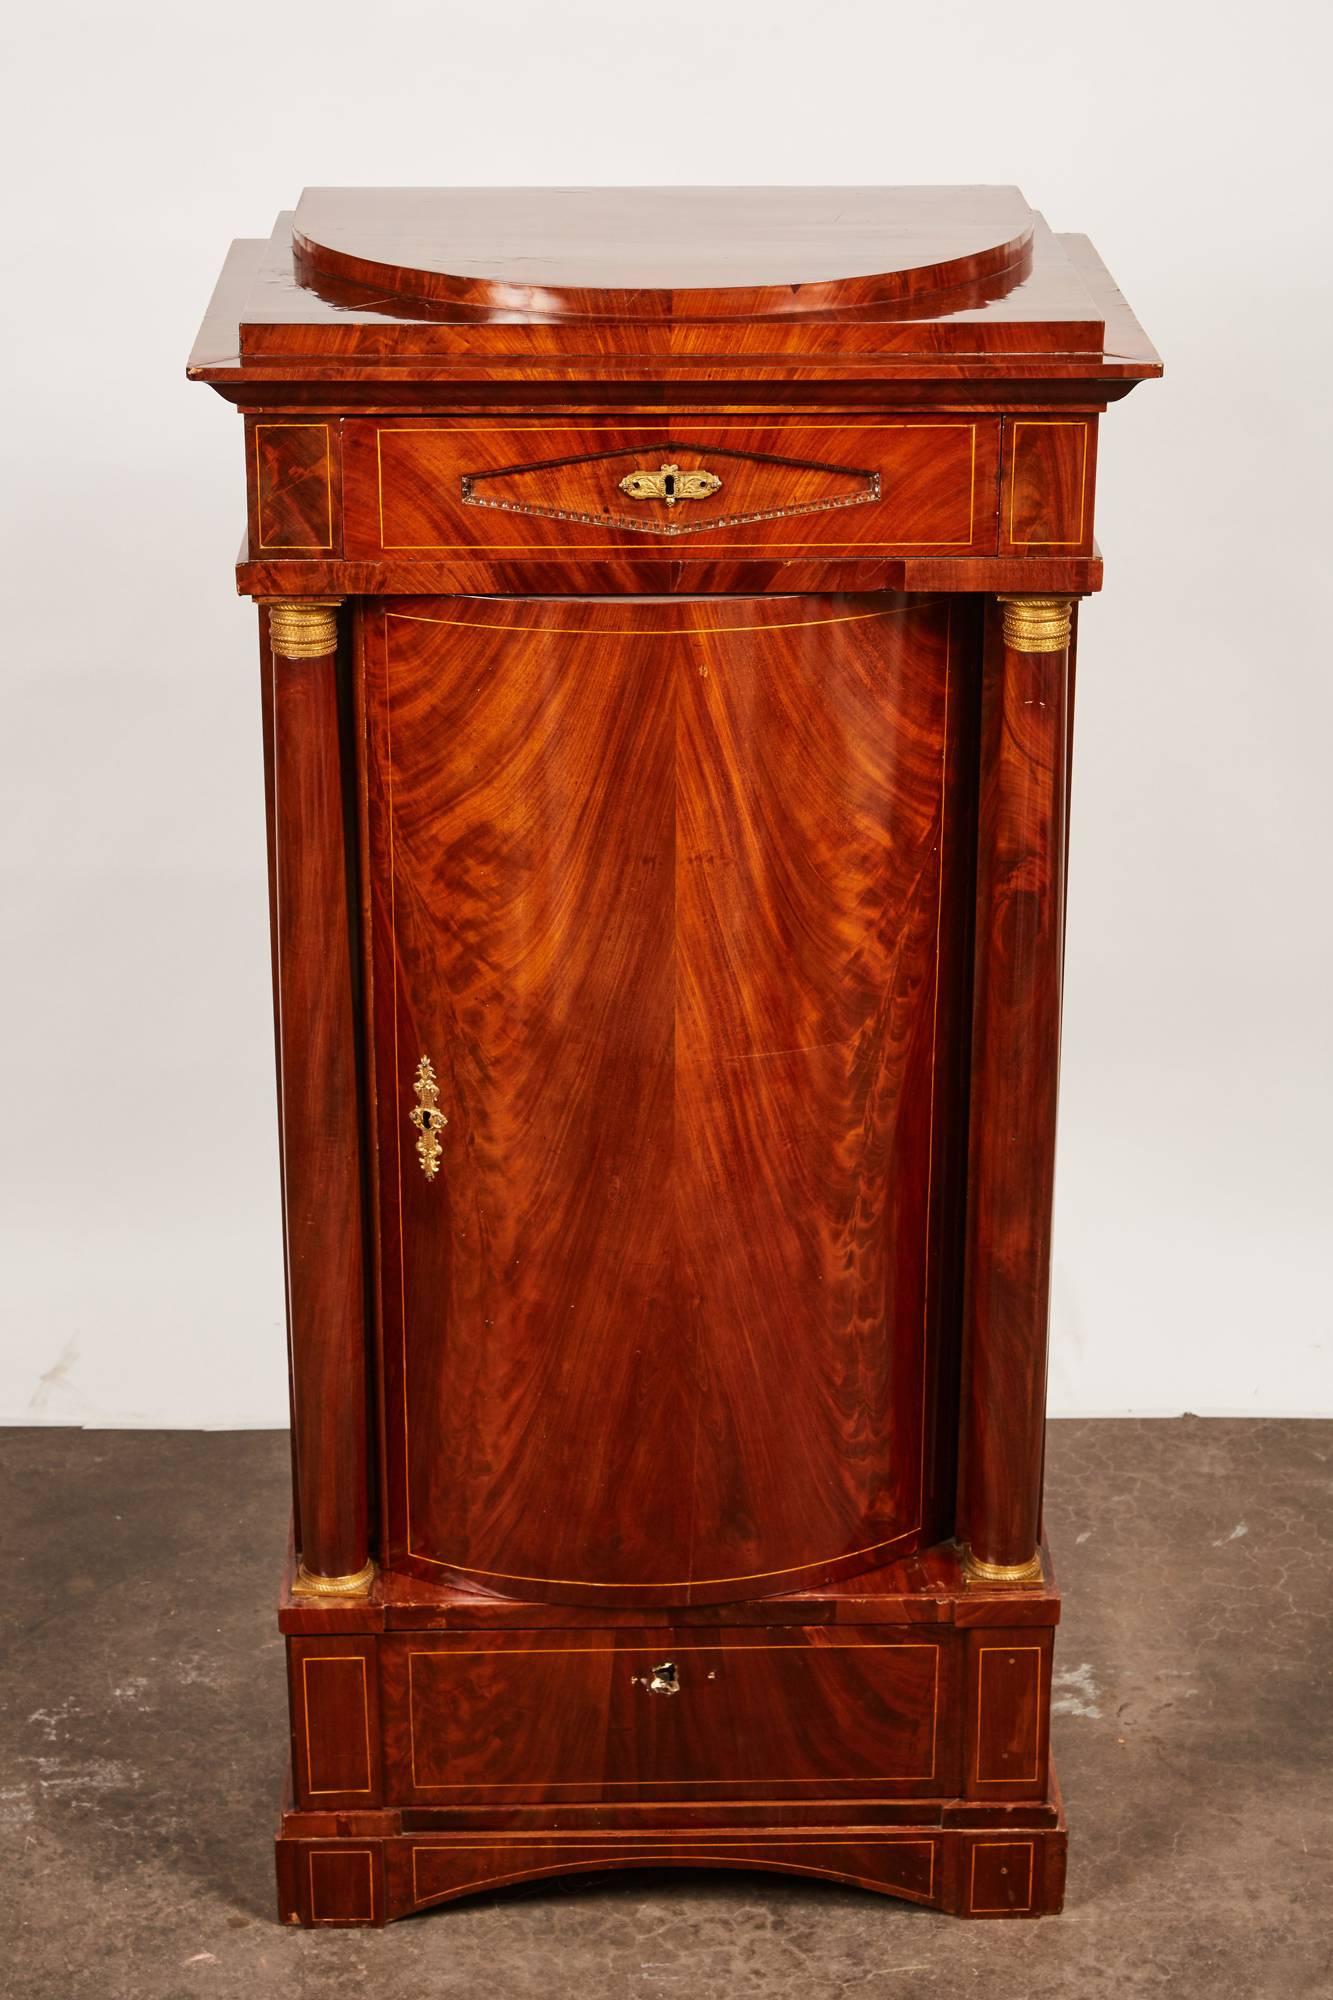 A remarkably elegant 19th century Empire cabinet that features beautiful crotch mahogany veneer. A drawer above one door that encloses three stationary shelves as well as a drawer below. A pair of columns flanks the curved door with gilt bases and